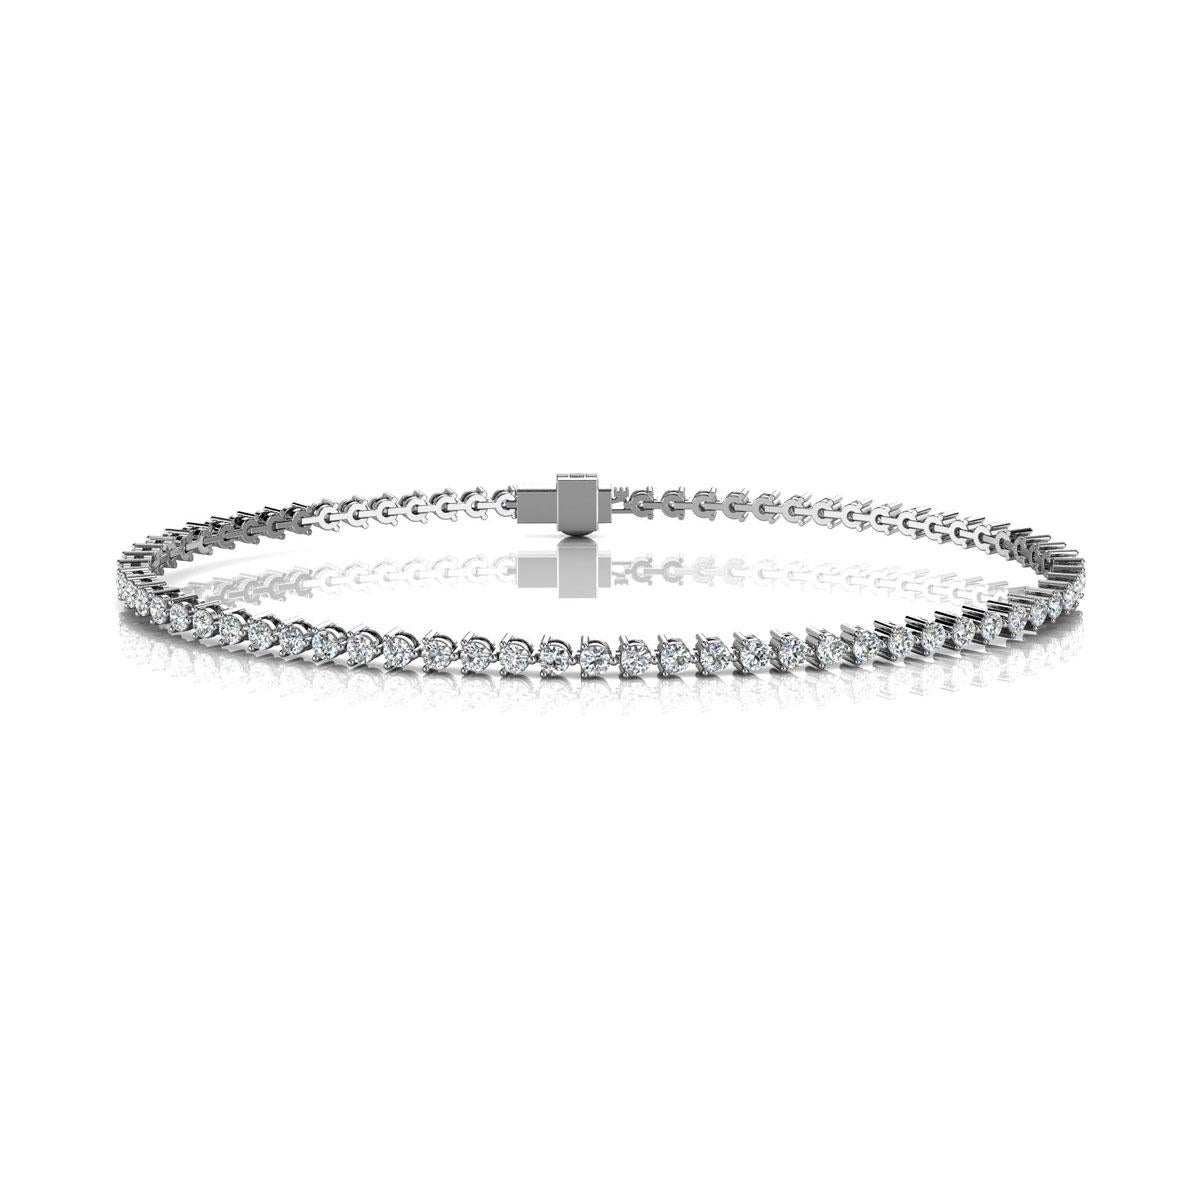 A timeless three prongs diamonds tennis bracelet. Experience the Difference!

Product details: 

Center Gemstone Type: NATURAL DIAMOND
Center Gemstone Color: WHITE
Center Gemstone Shape: ROUND
Center Diamond Carat Weight: 2
Metal: 18K White